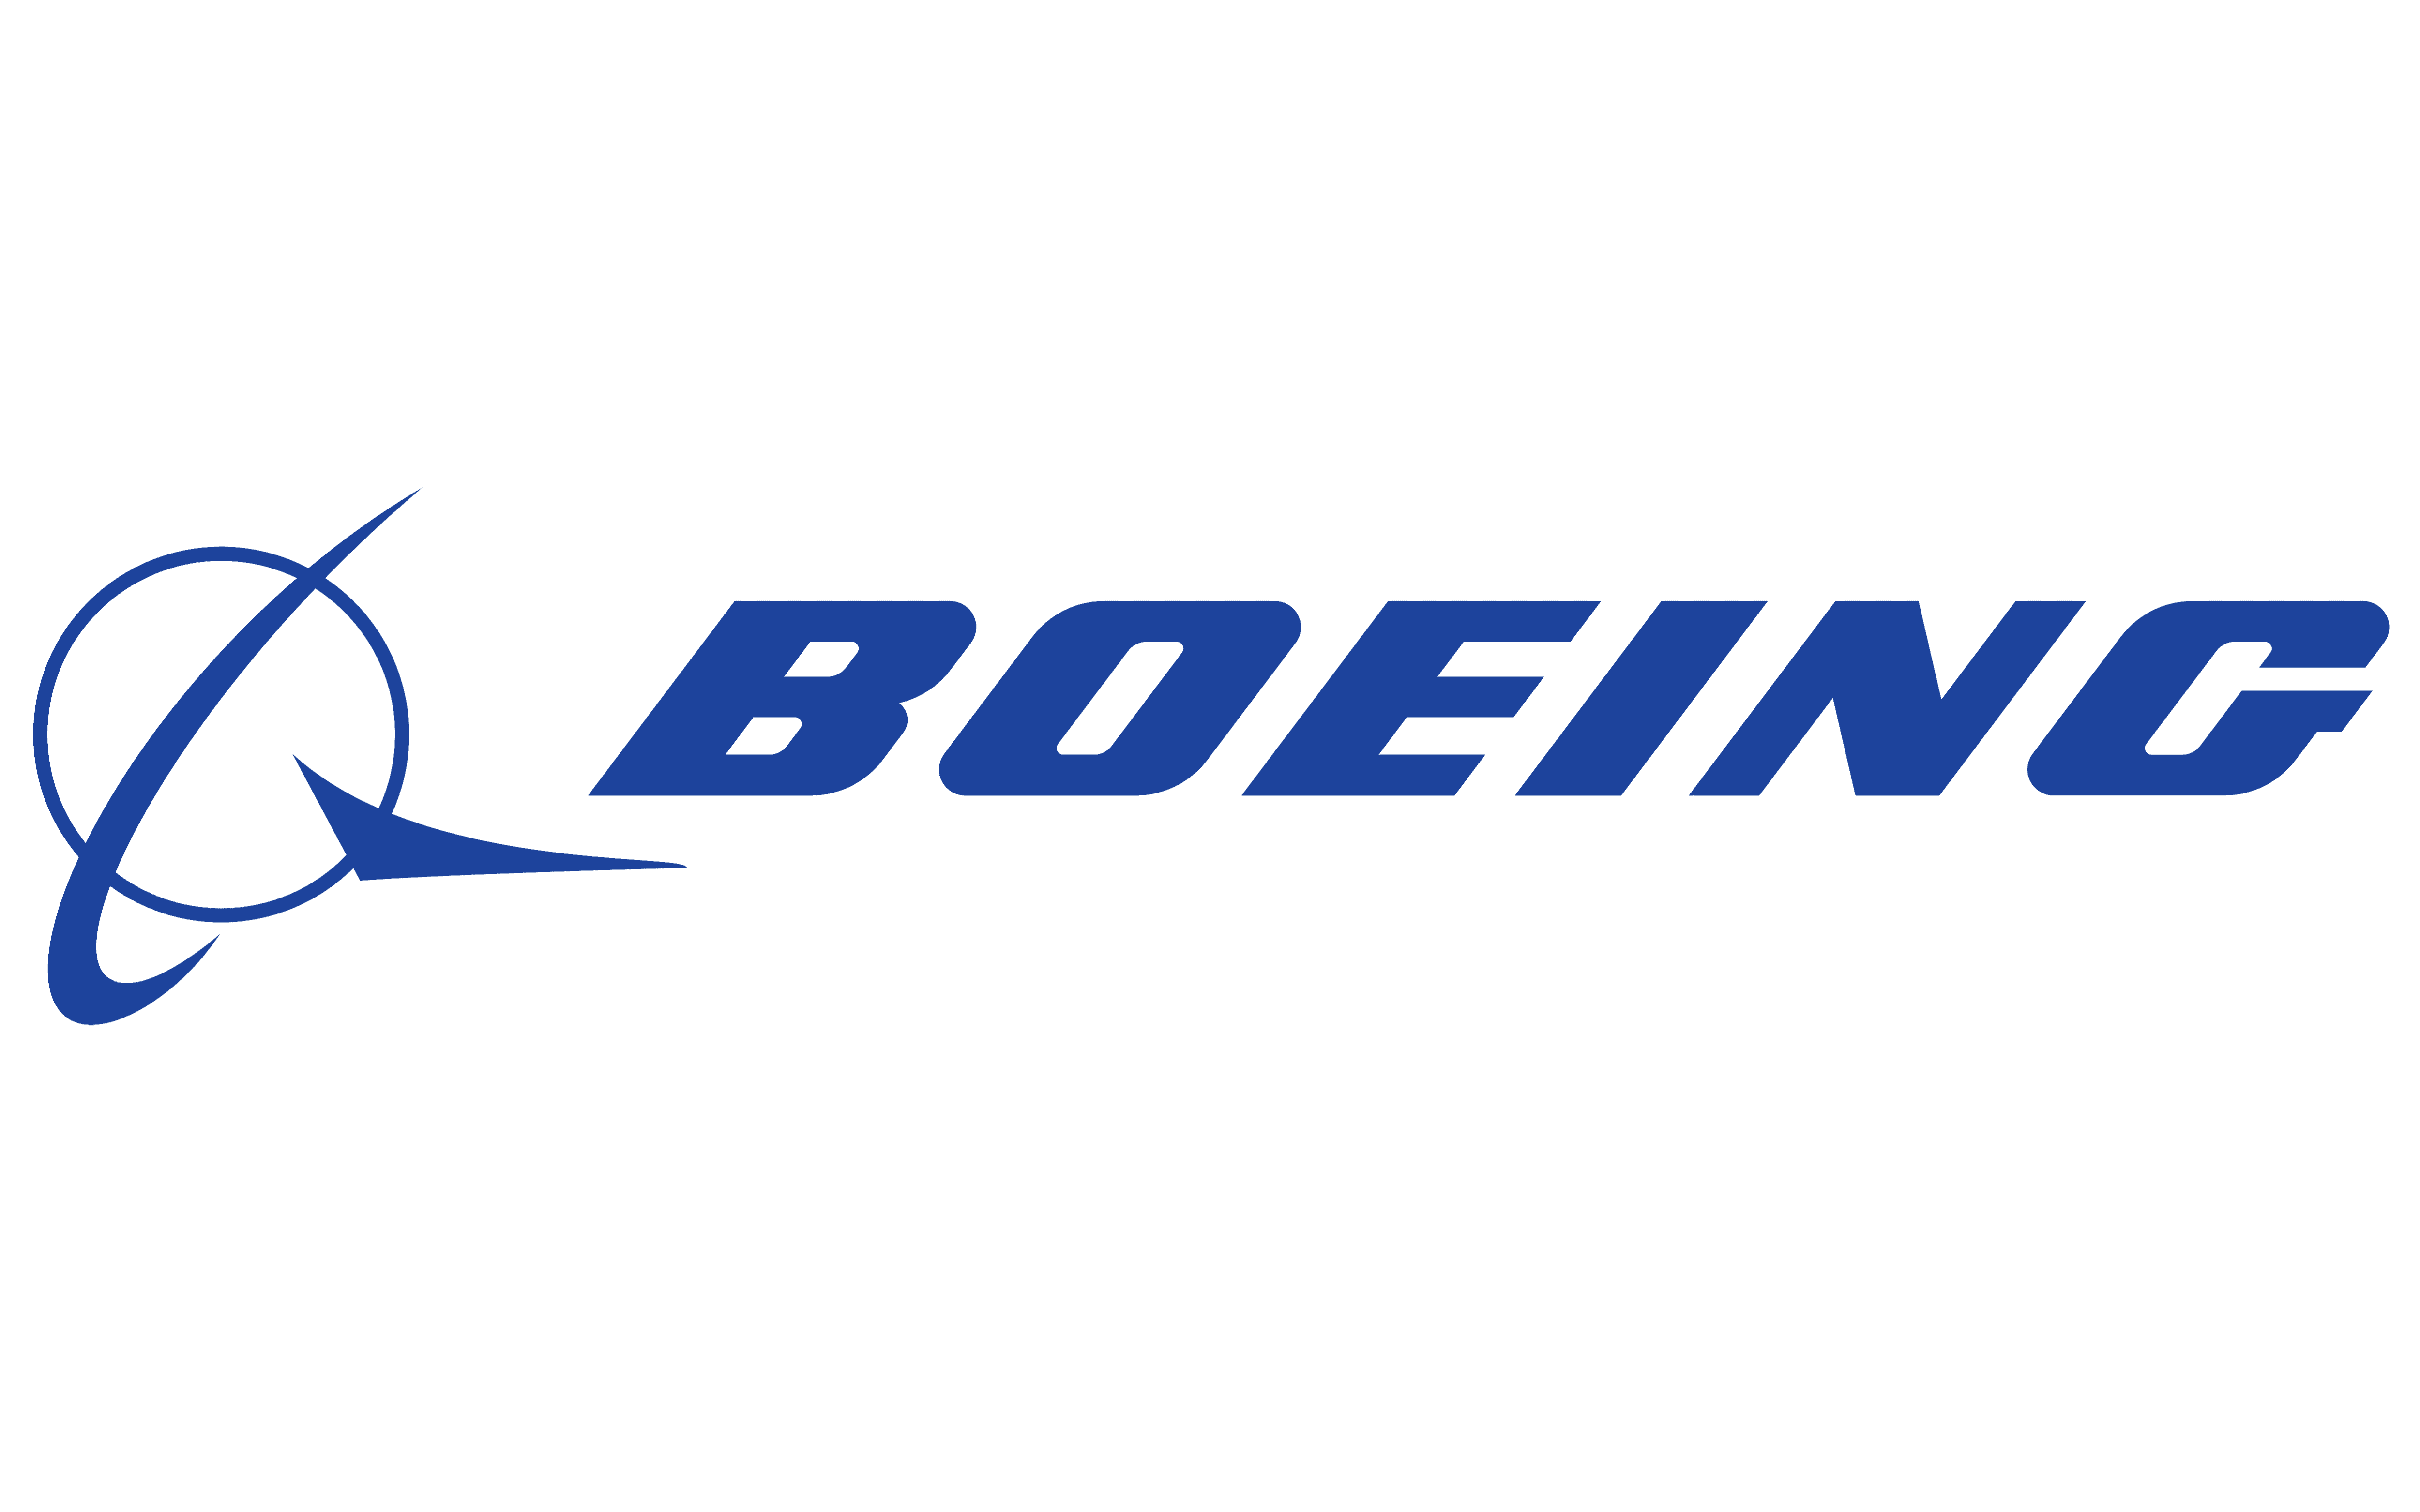 classic BOEING the BOEING company SINCE 1916 top QUALITY MAGNET 